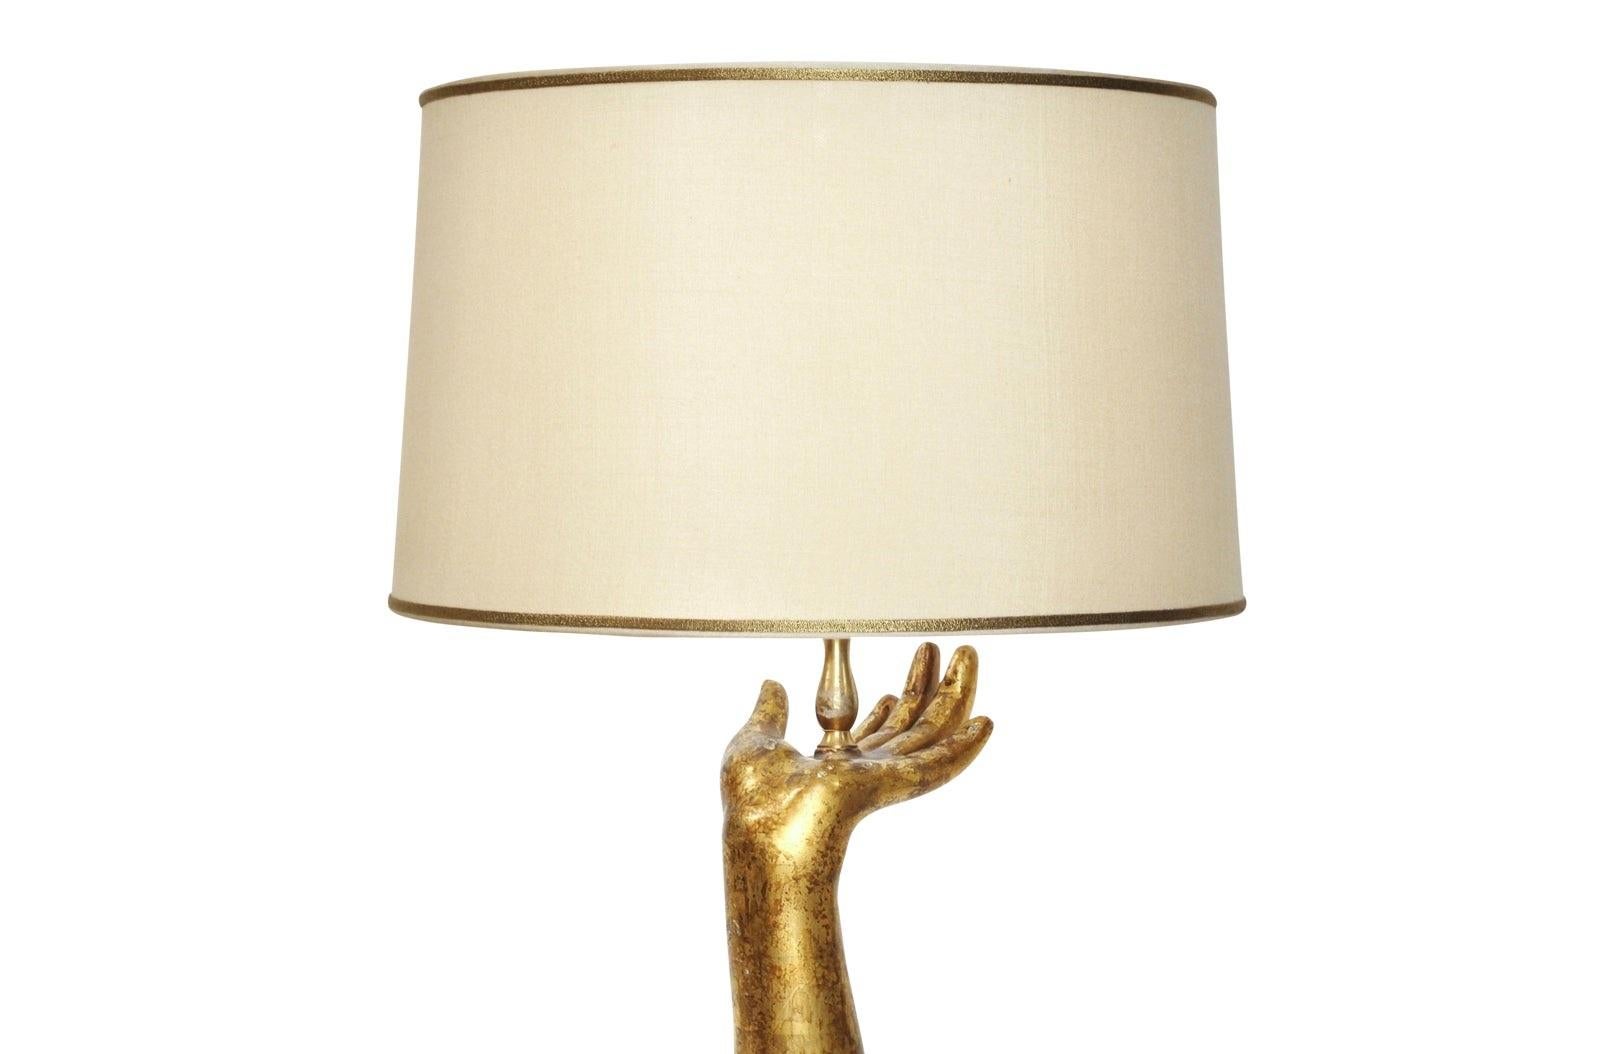 Exquisite Designer Giltwood Hand Form Table Lamp by Randy Esada Designs
